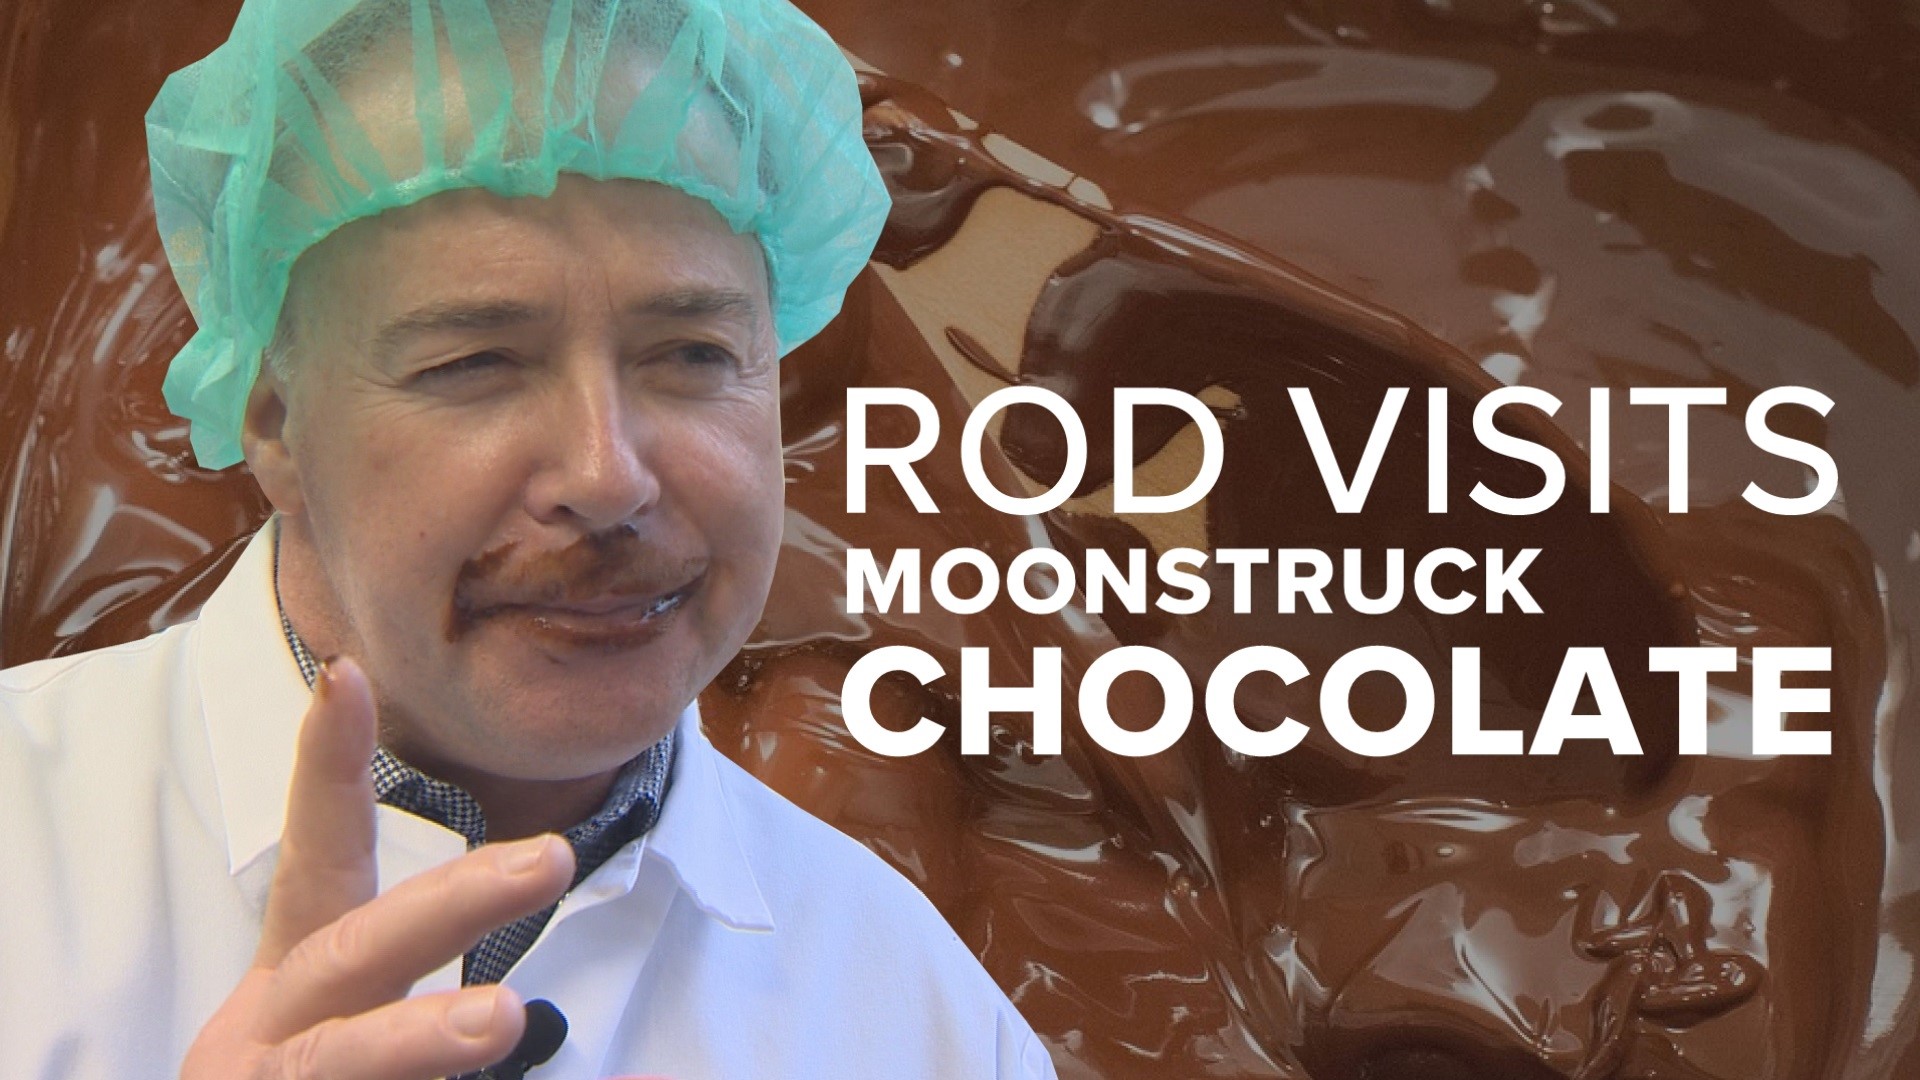 Valentine's Day is coming up, so meteorologist Rod Hill stopped by Moonstruck Chocolate to make his own heart-shaped truffles.